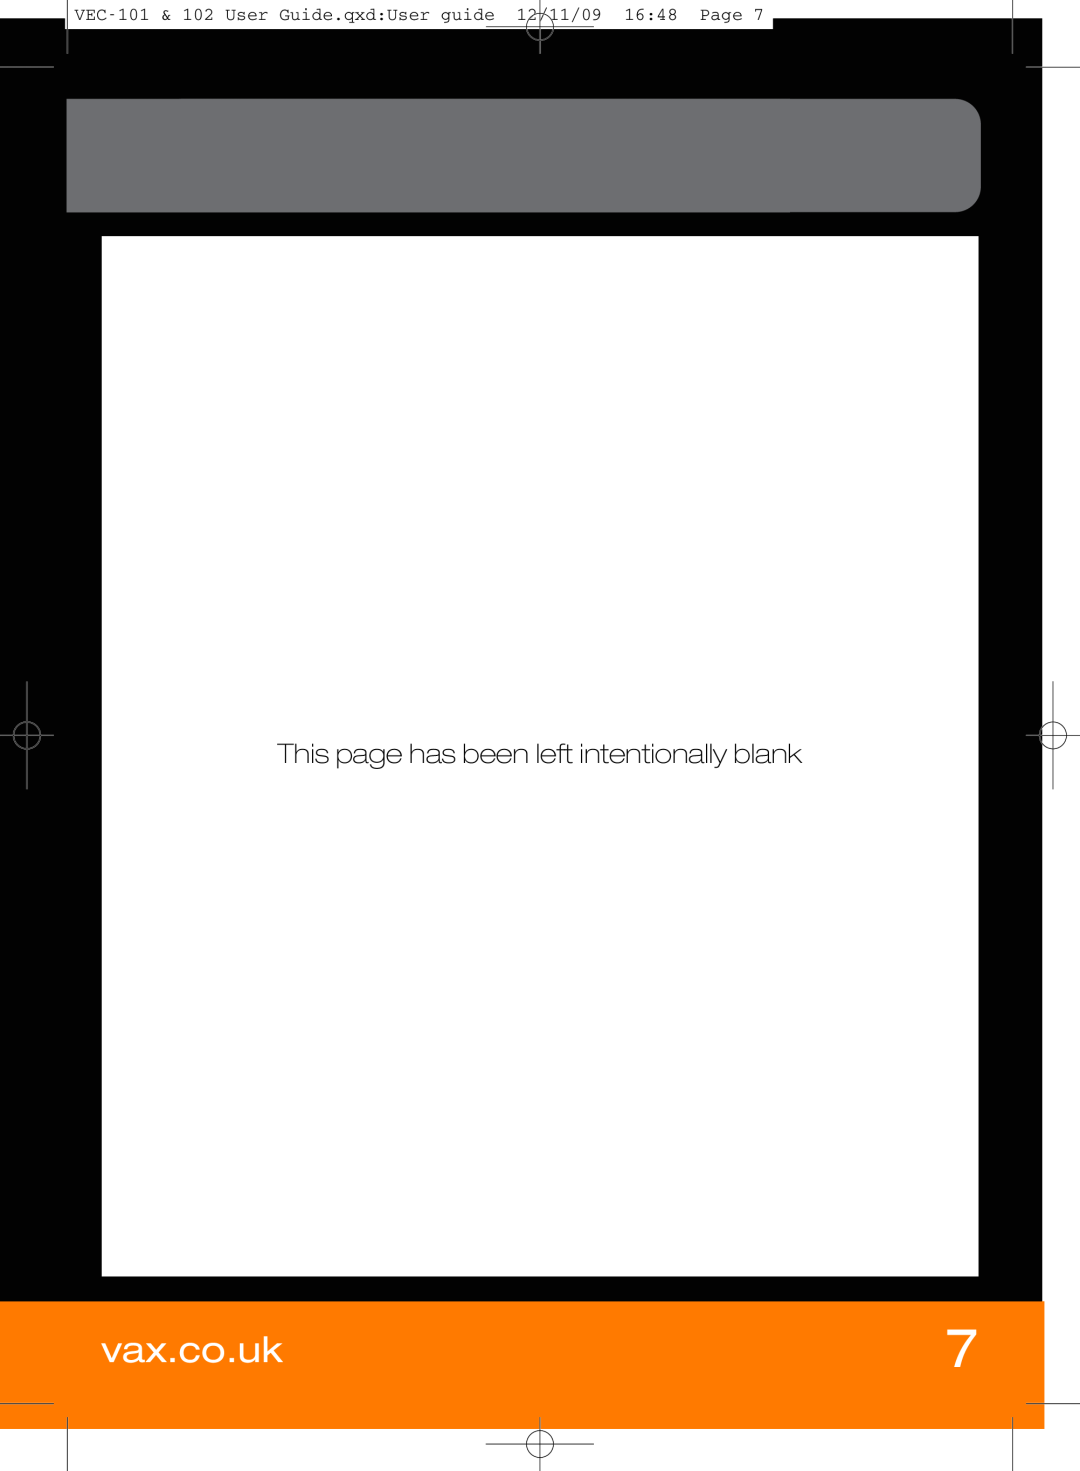 Vizio VEC-101 manual This page has been left intentionally blank, vax.co.uk 